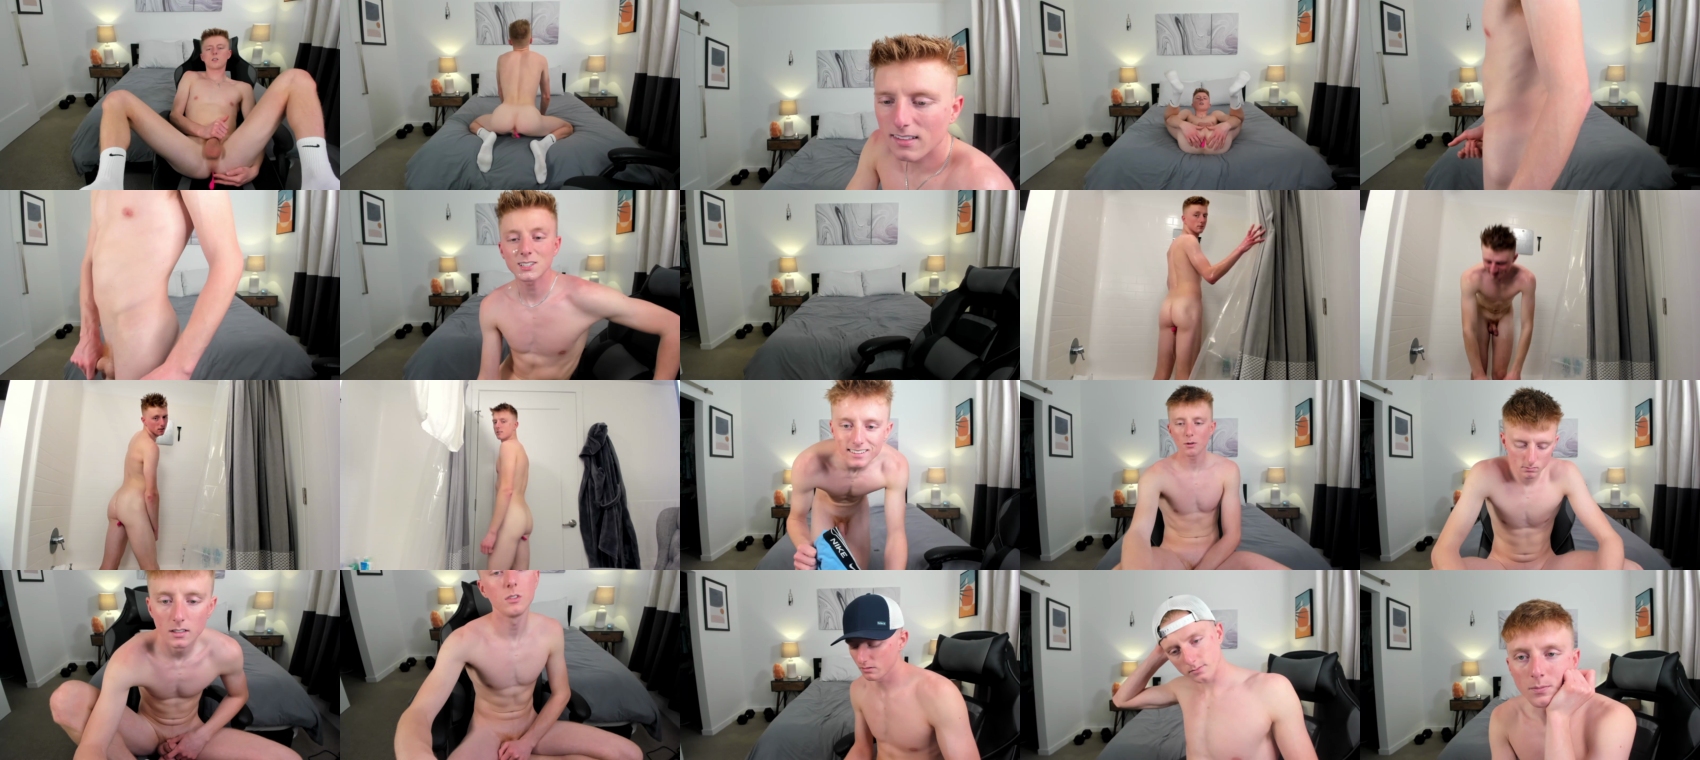 richiewest beautiful CAM SHOW @ Chaturbate 23-12-2022